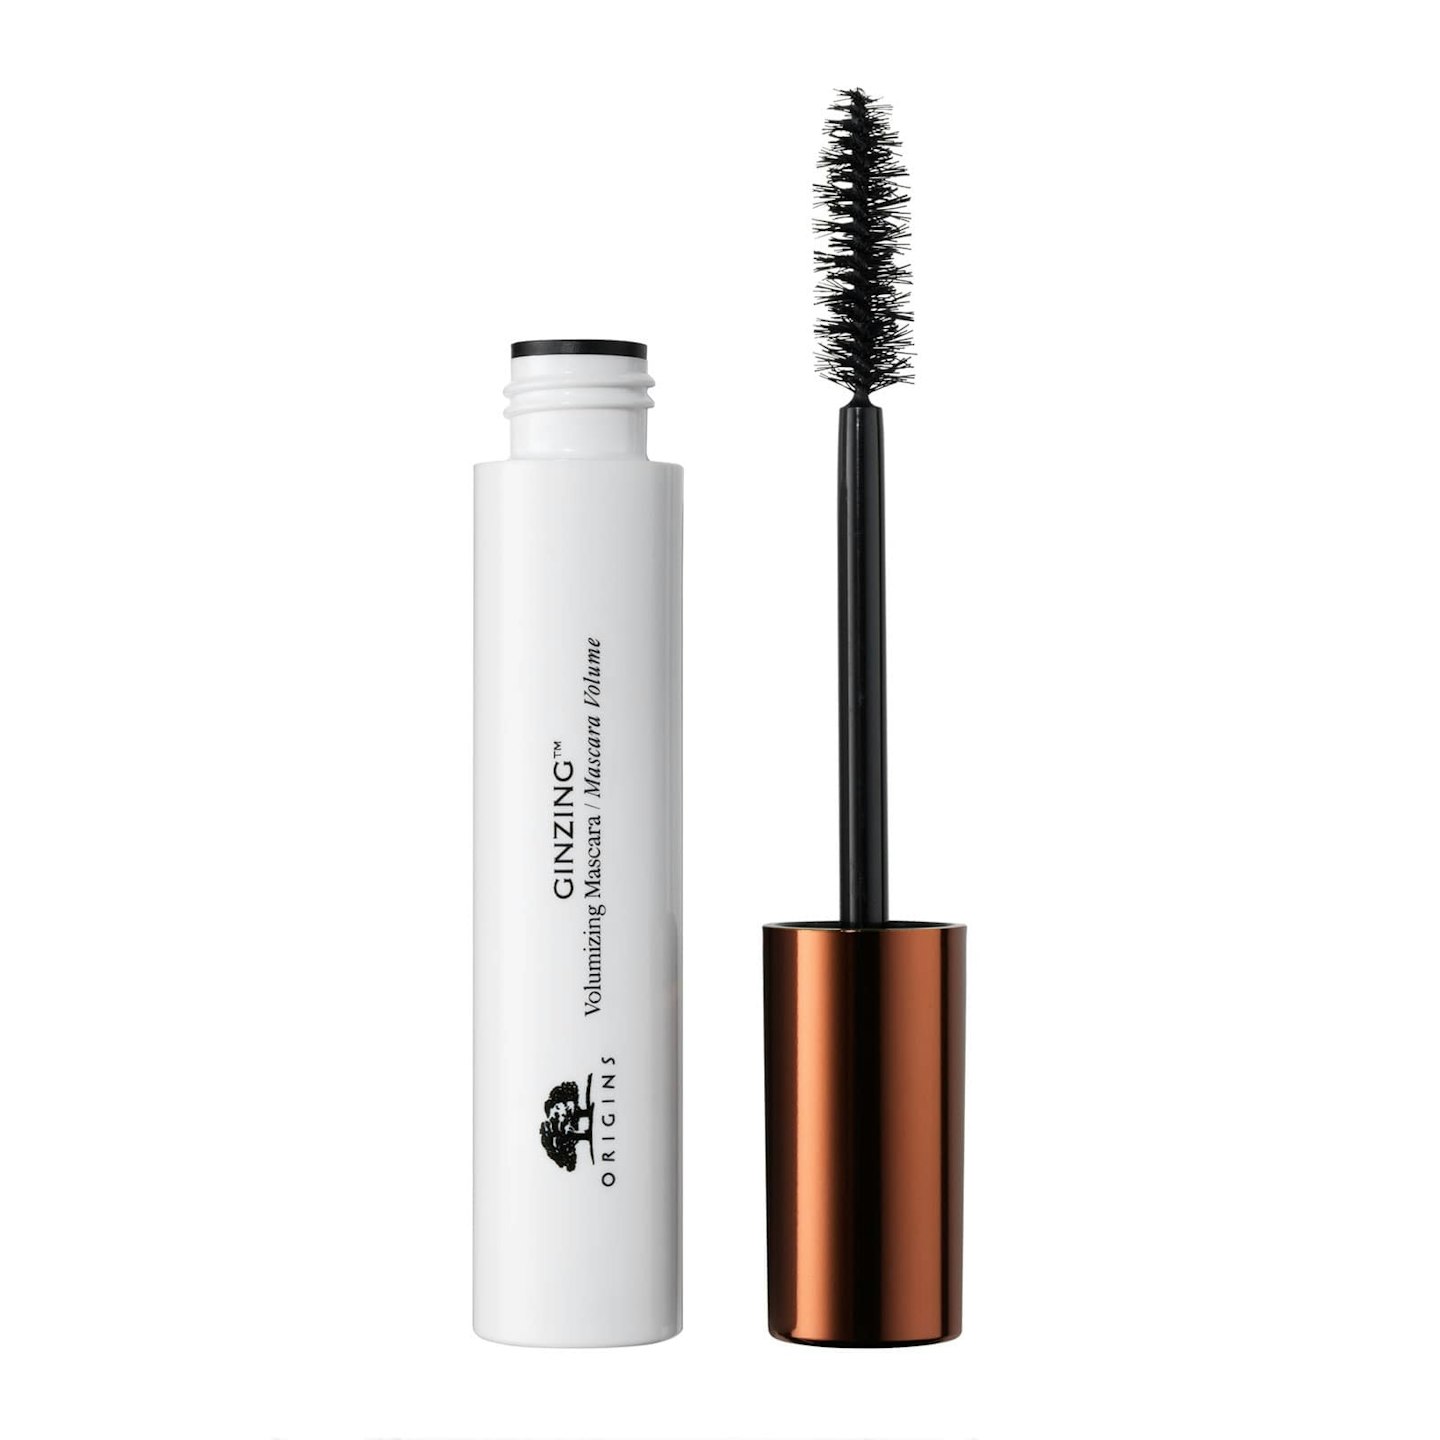 Mascaras For Sensitive And Delicate Eyes